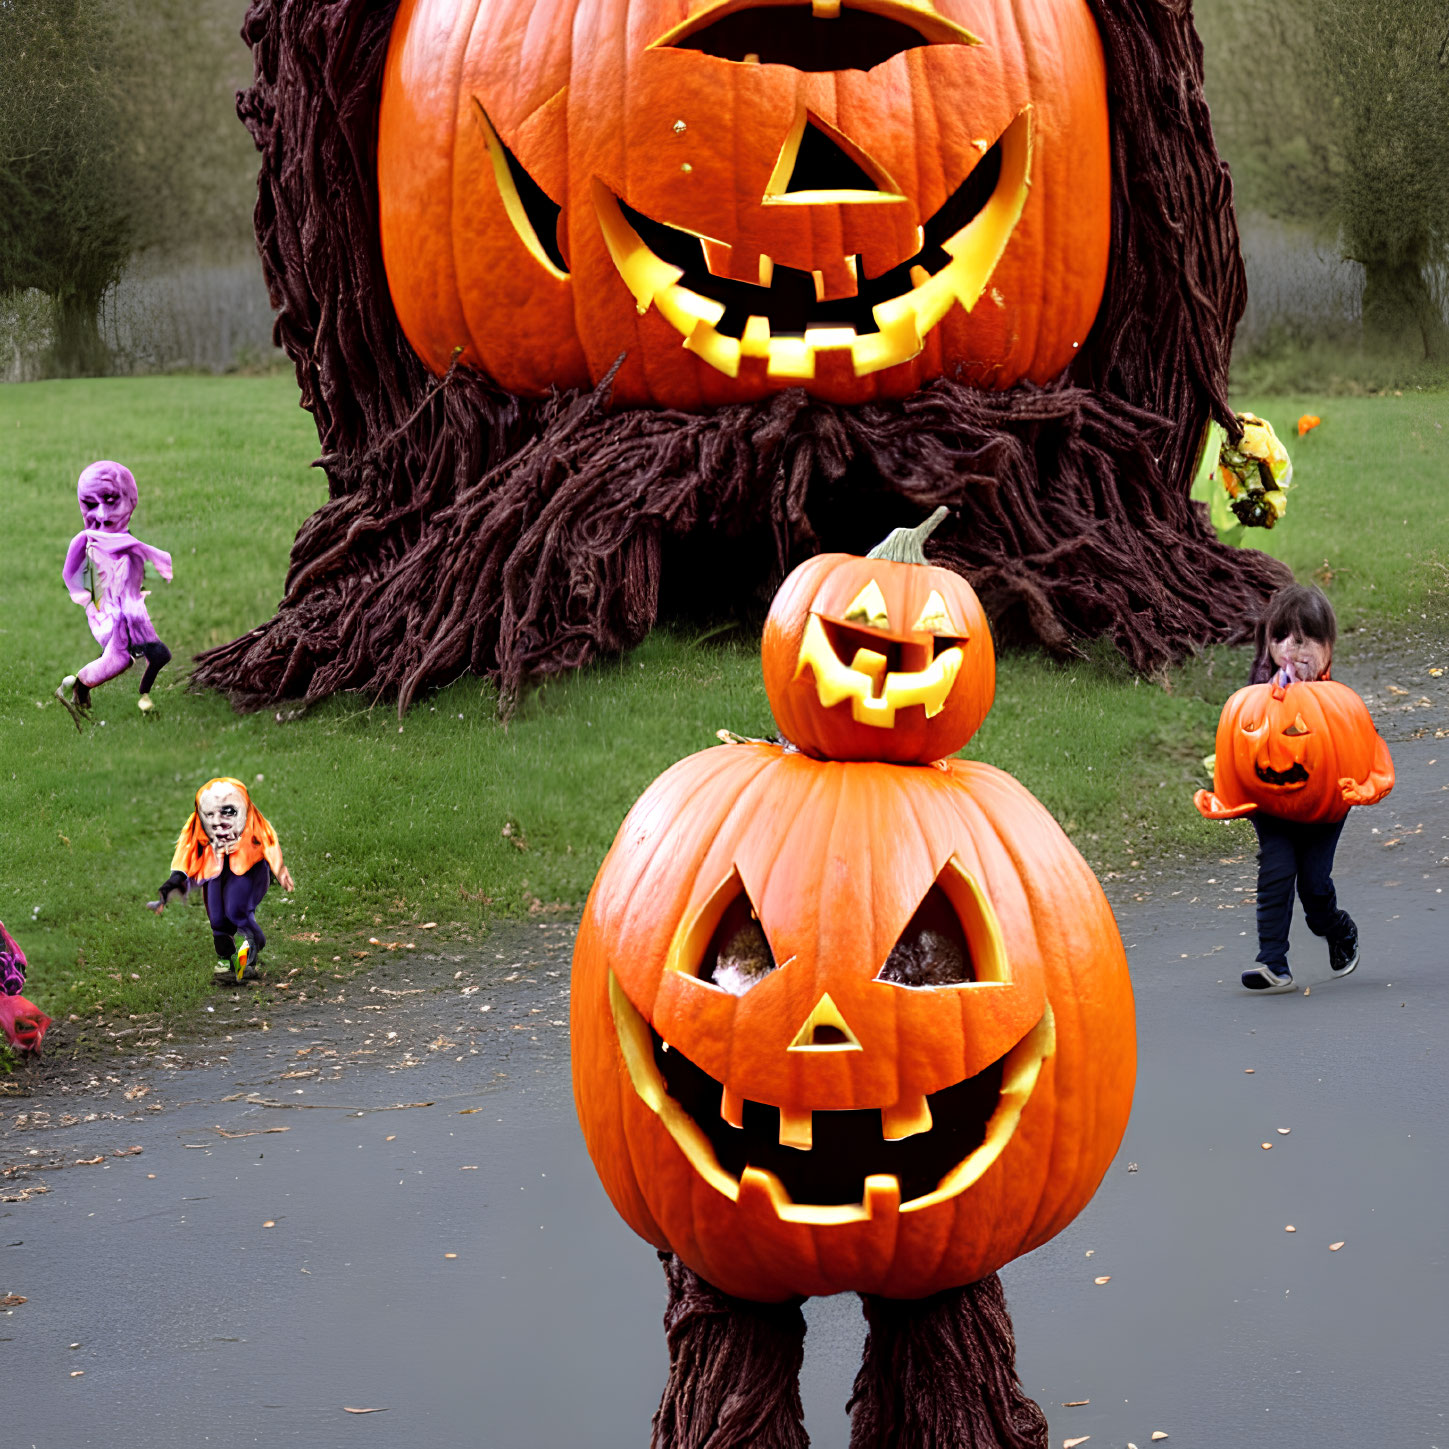 Kids in Halloween costumes with large pumpkin decorations